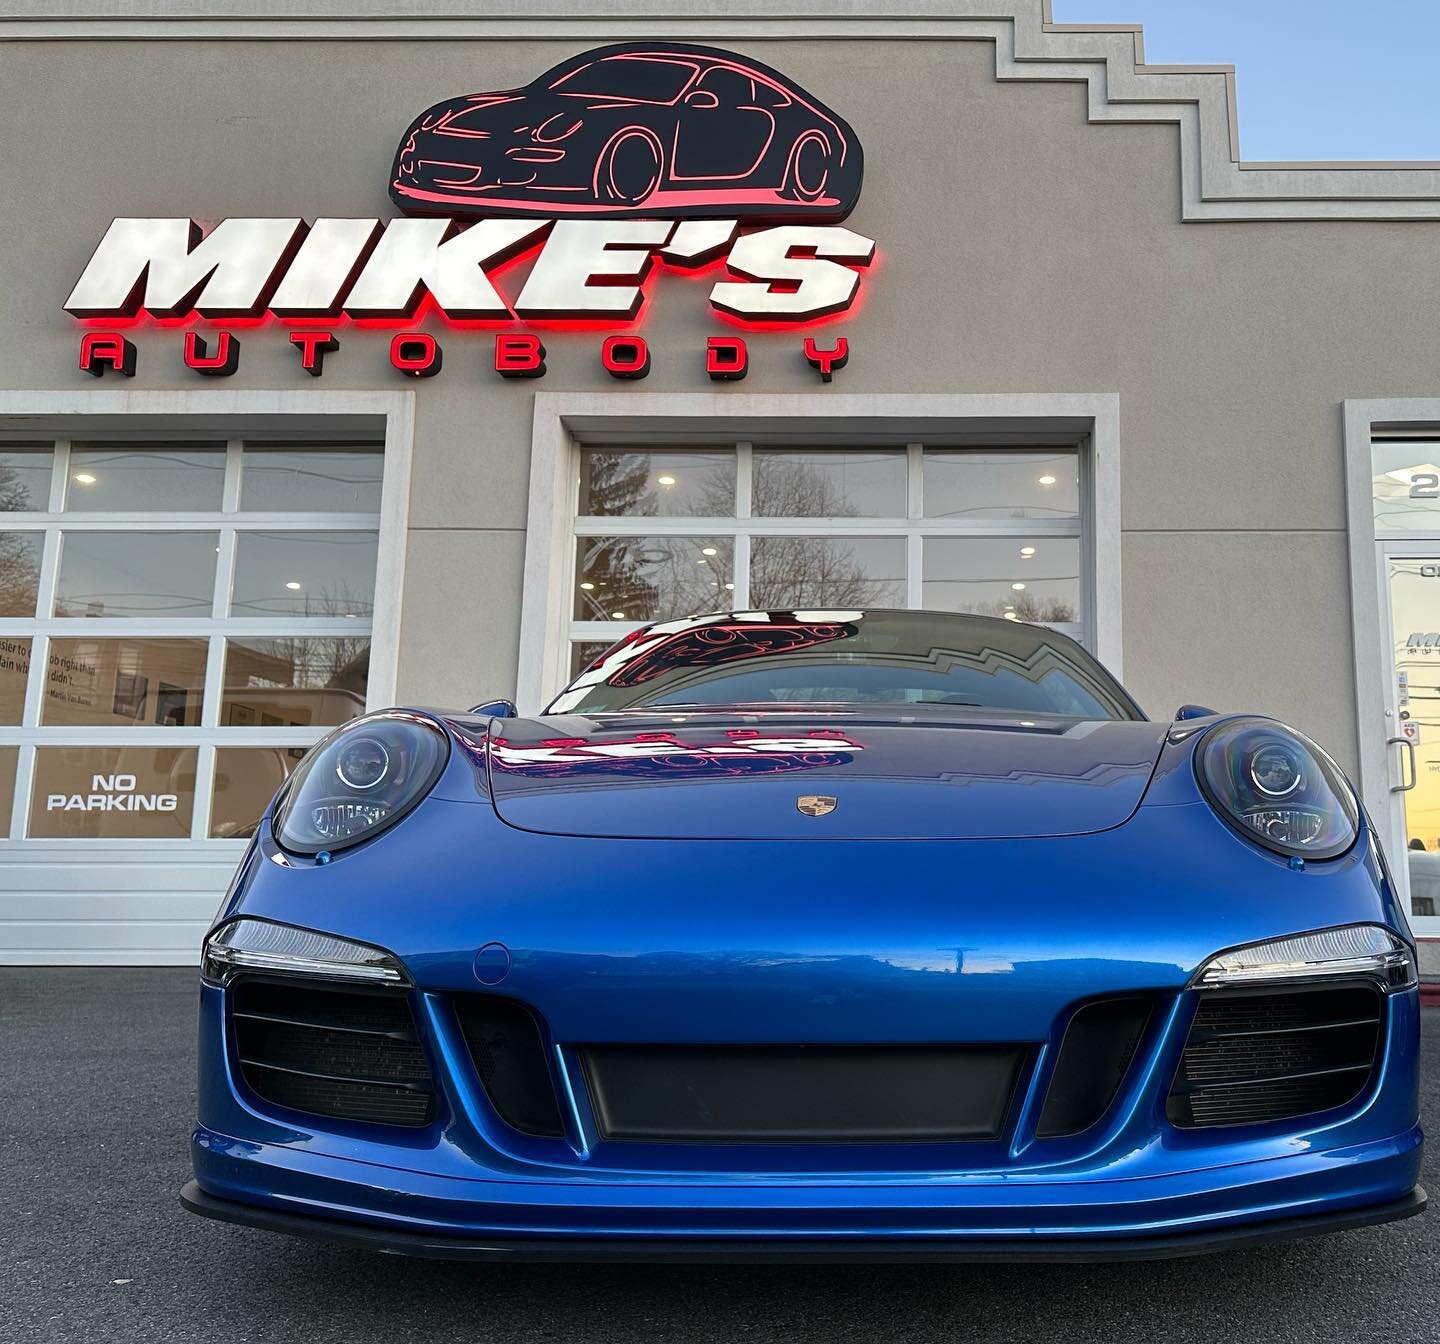 Perfection is a passion&hellip;&hellip;
991.1 in for some factory Porsche accessories, including that ducktail and sport design mirrors. Do you like it? 
Comment, like and share. @hellohenrywu 
🔵🔵🔵🔵🔵🔵🔵🔵 #mikesautobody #malden #mikesautobodyof